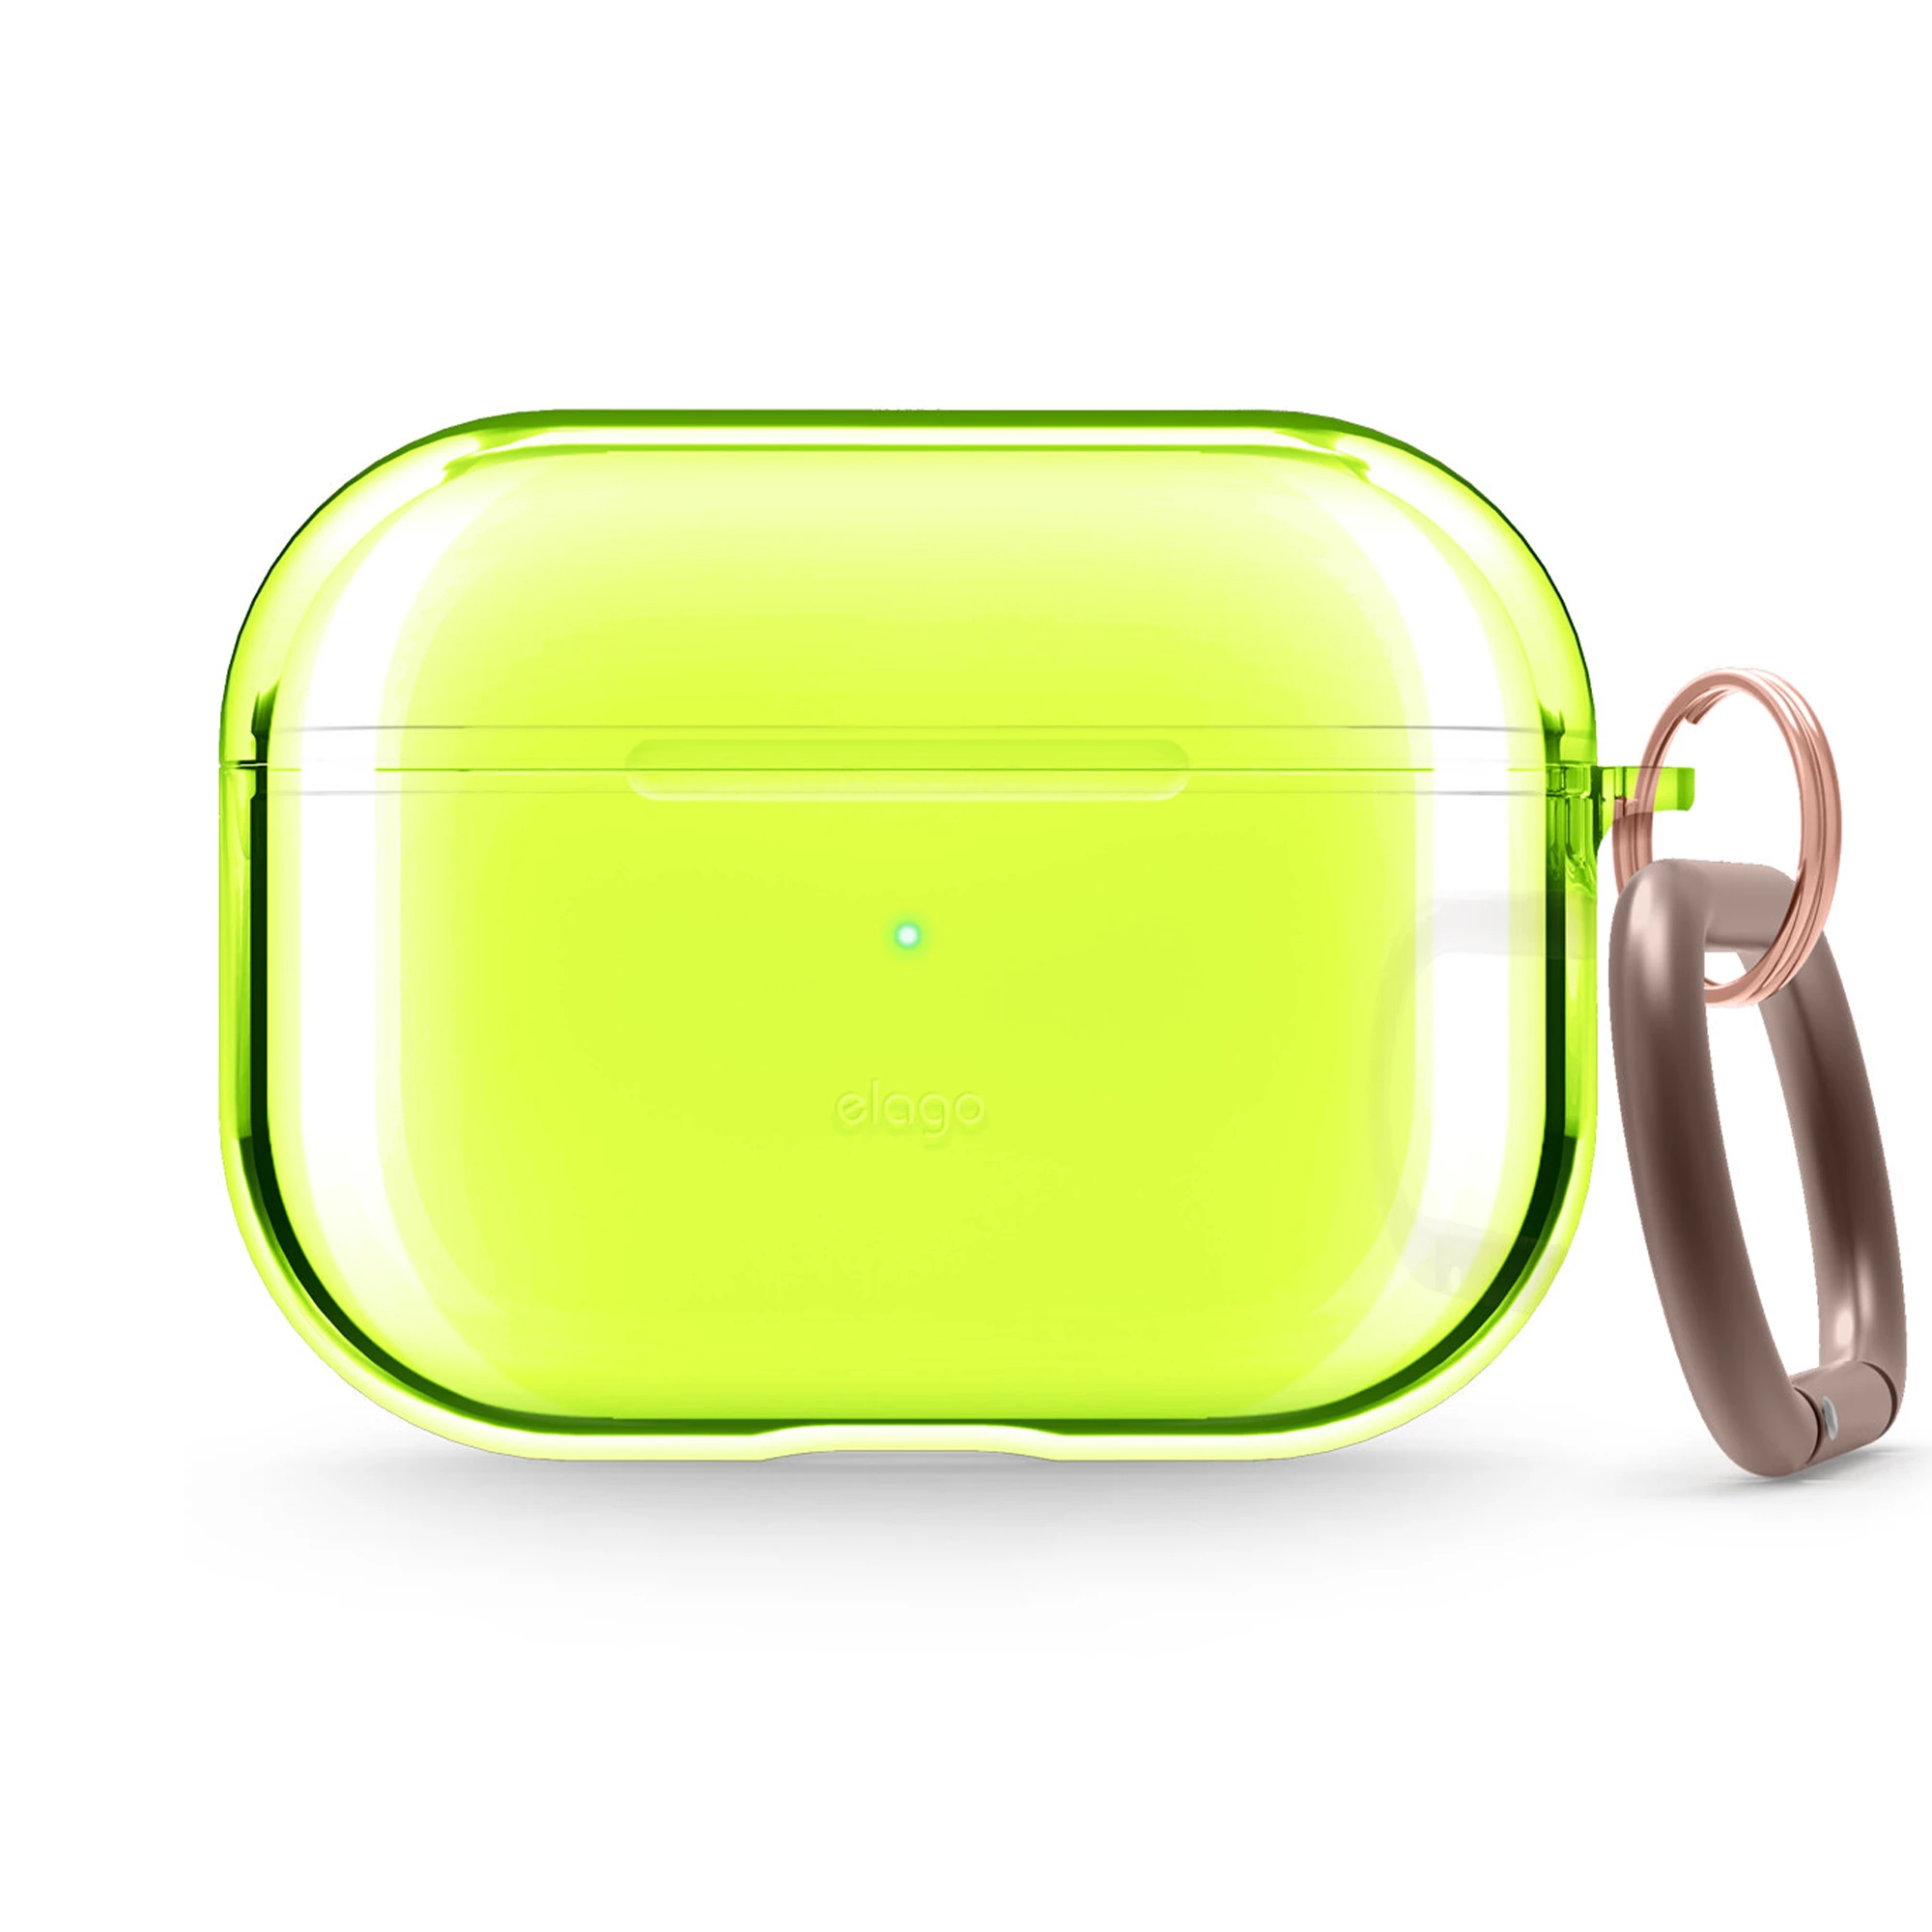 Elago Clear Case for Airpods Pro - Neon Yellow (EAPPCL-HANG-NYE)